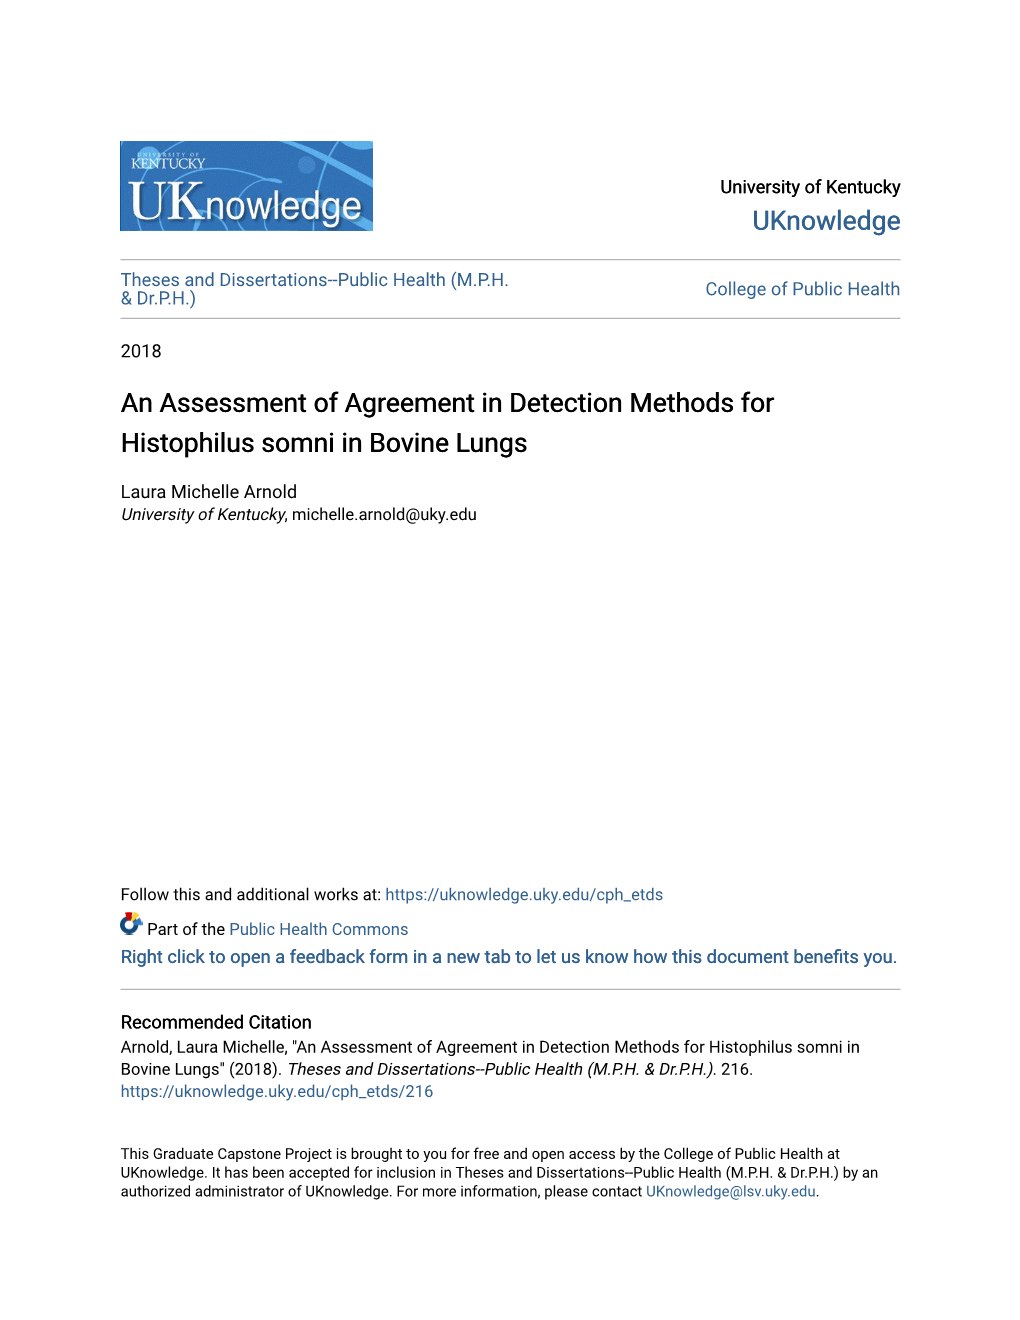 An Assessment of Agreement in Detection Methods for Histophilus Somni in Bovine Lungs